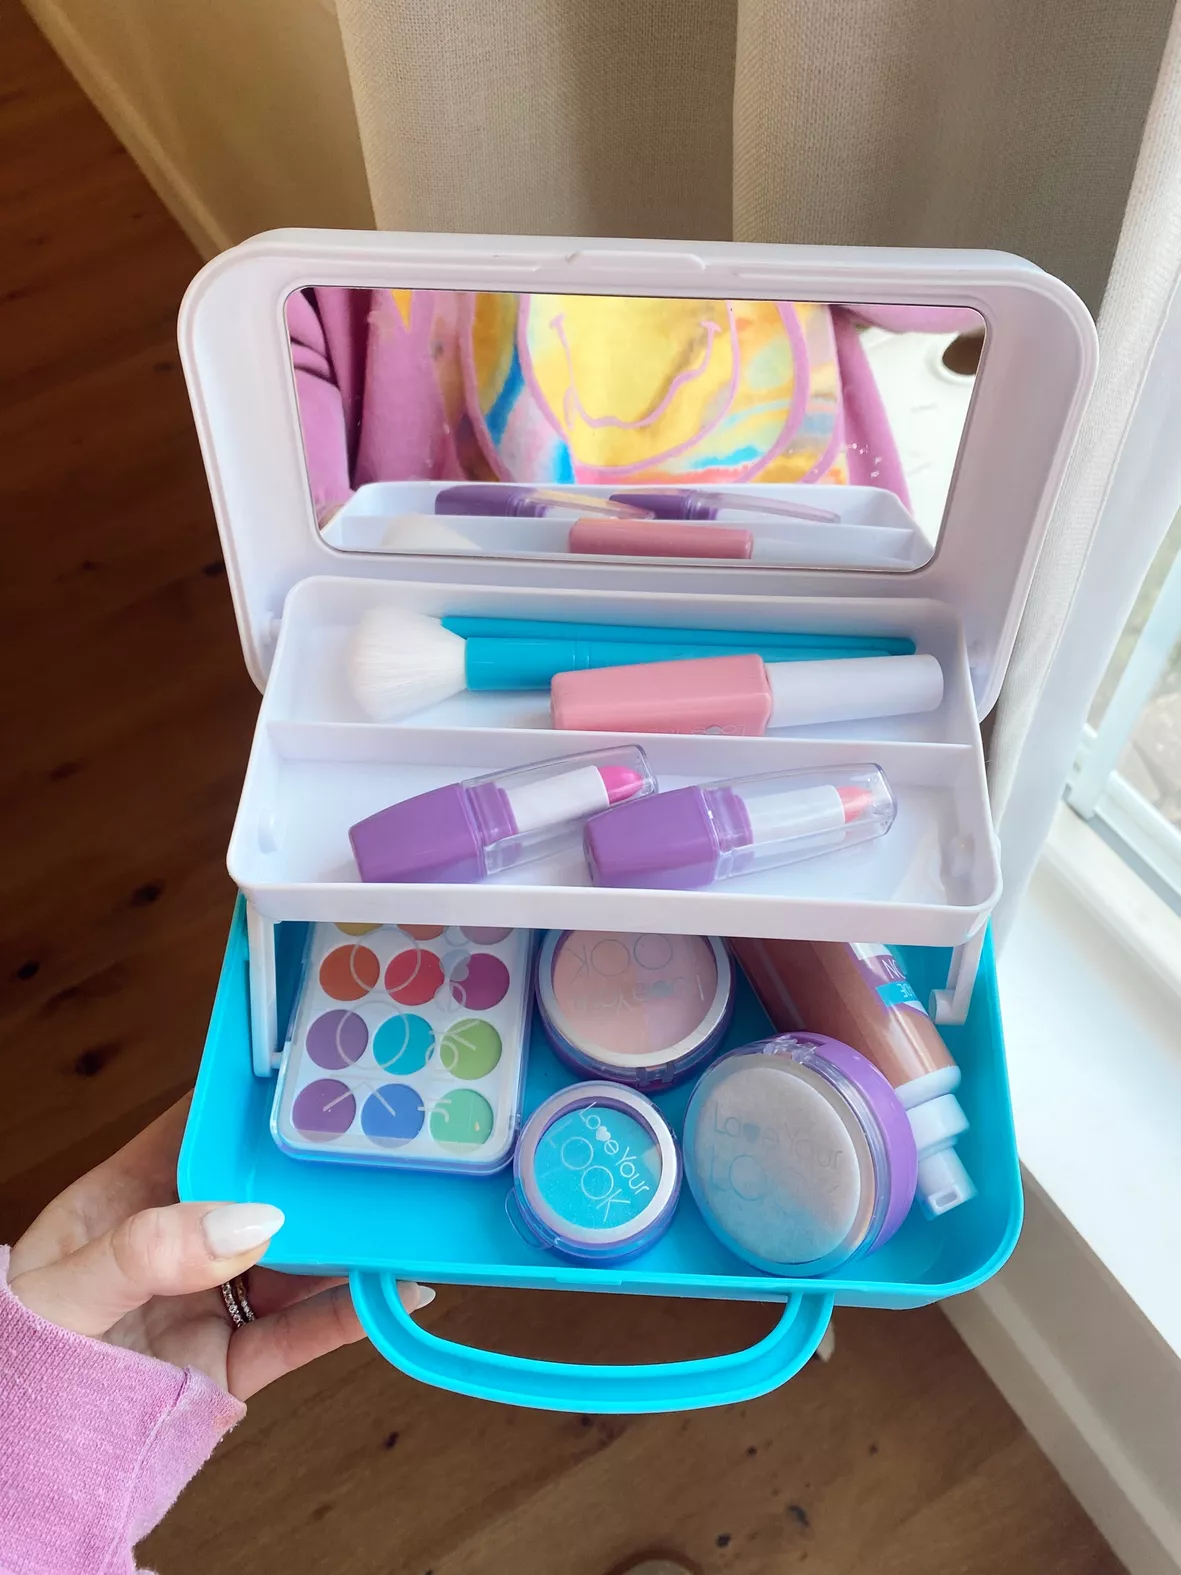 It's time to get ready with our Love Your Look Makeup set 💄 #grwm #pr, melissa and doug makeup set